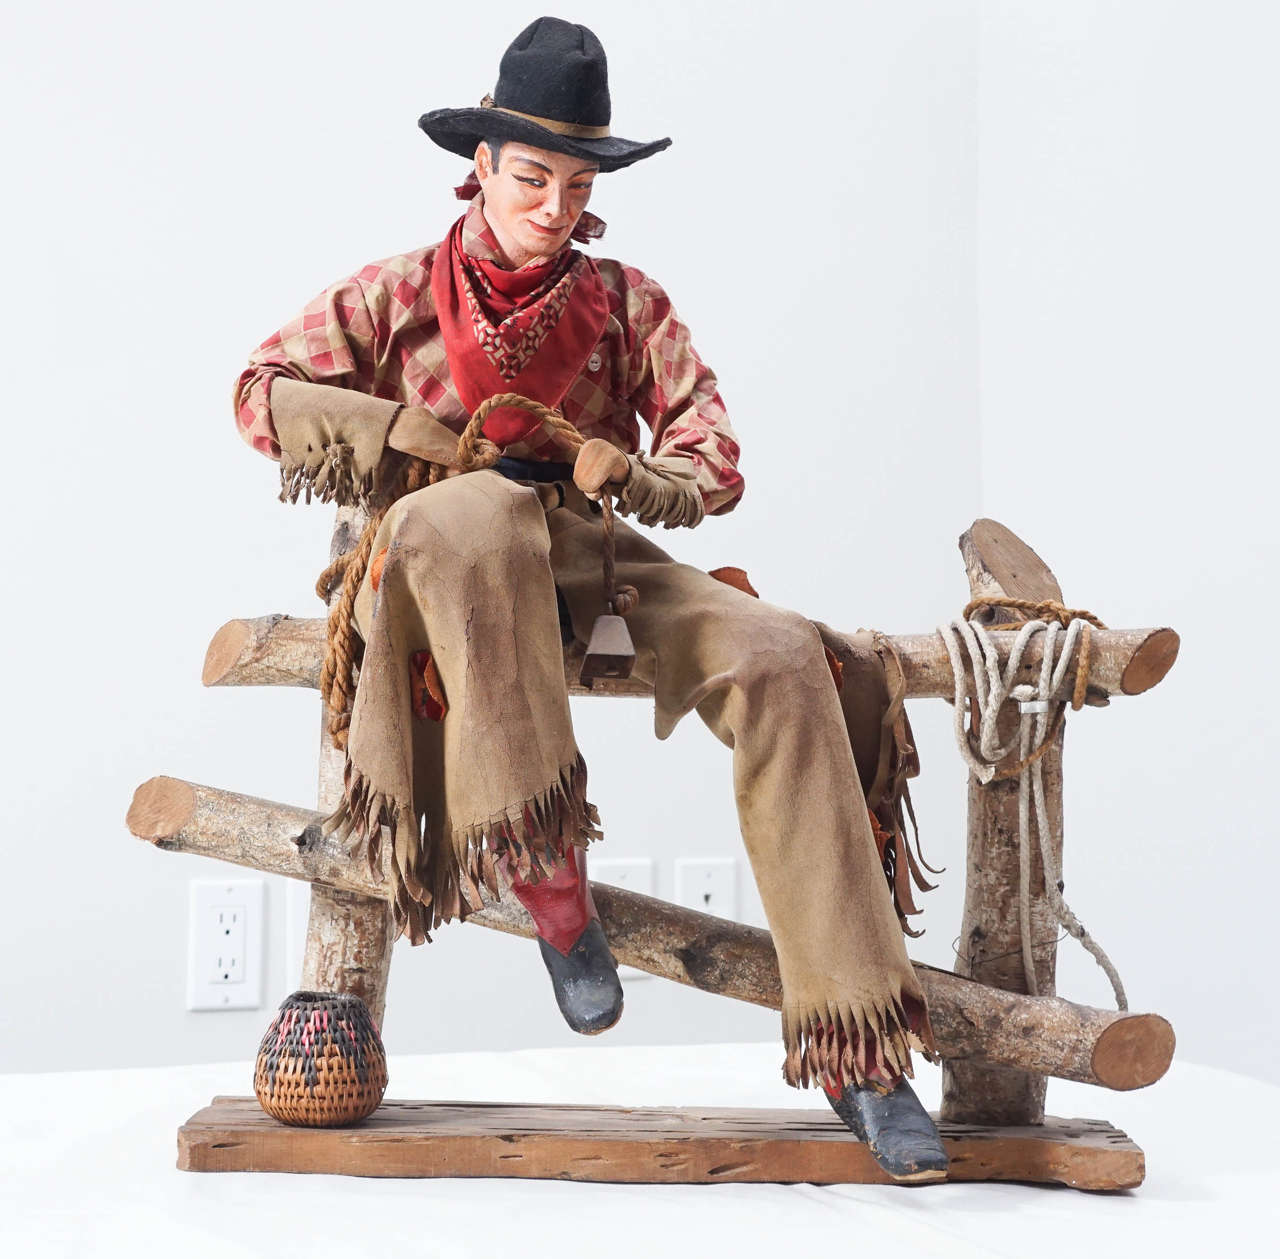 The cowboy sculpture from the 1940s may have been a display piece for a clothing store selling western wear. Now he is a great piece of art.